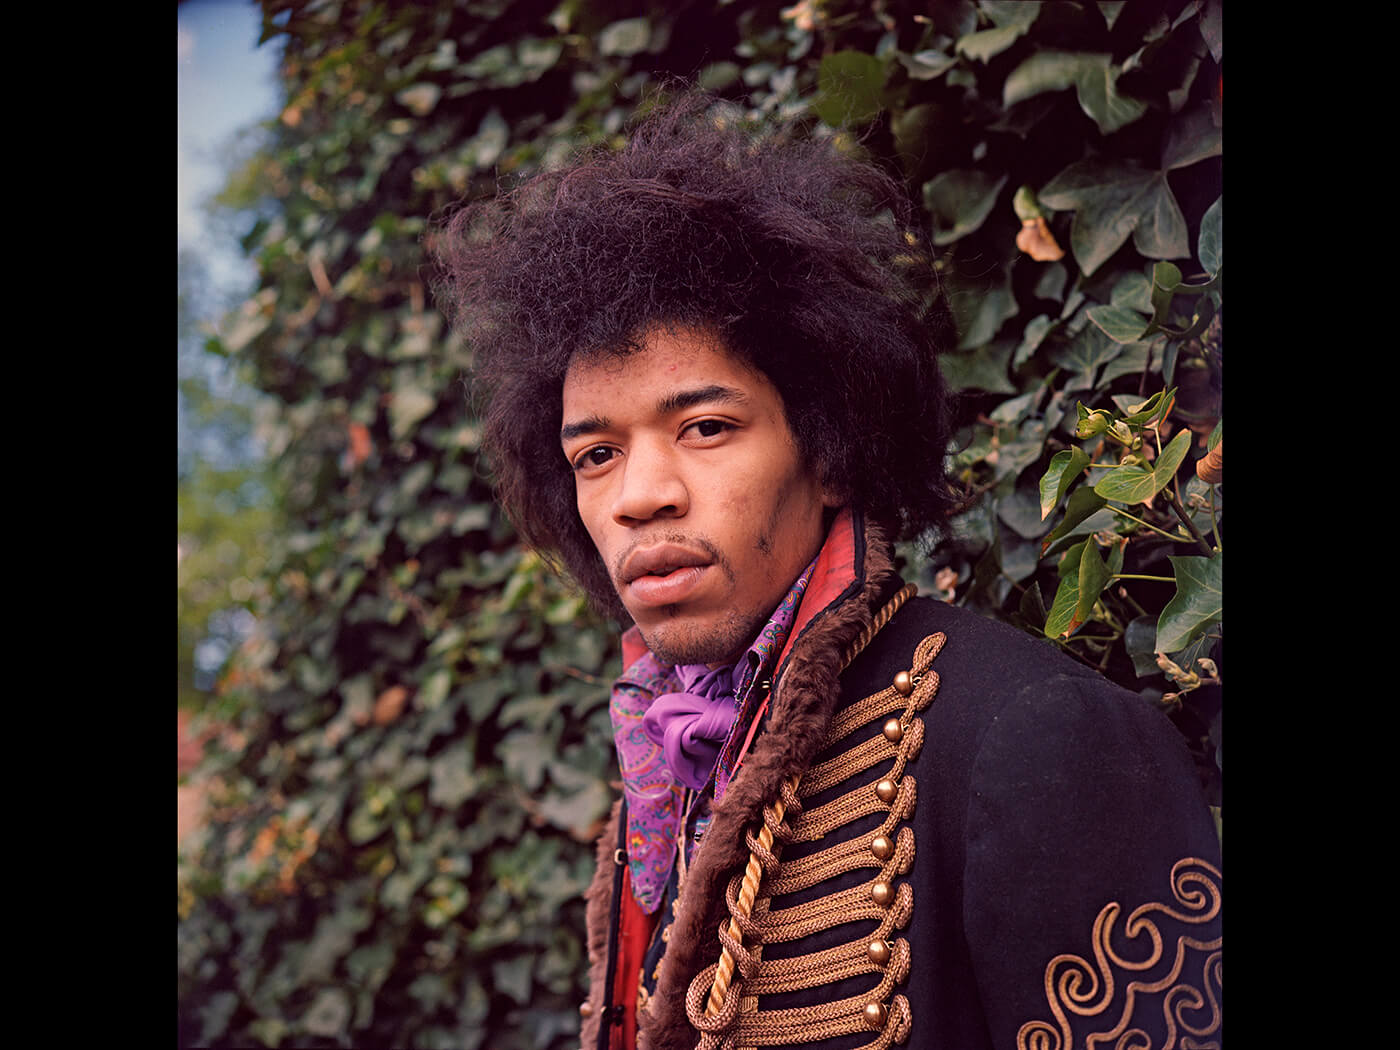 View a gallery of rare Jimi Hendrix photos